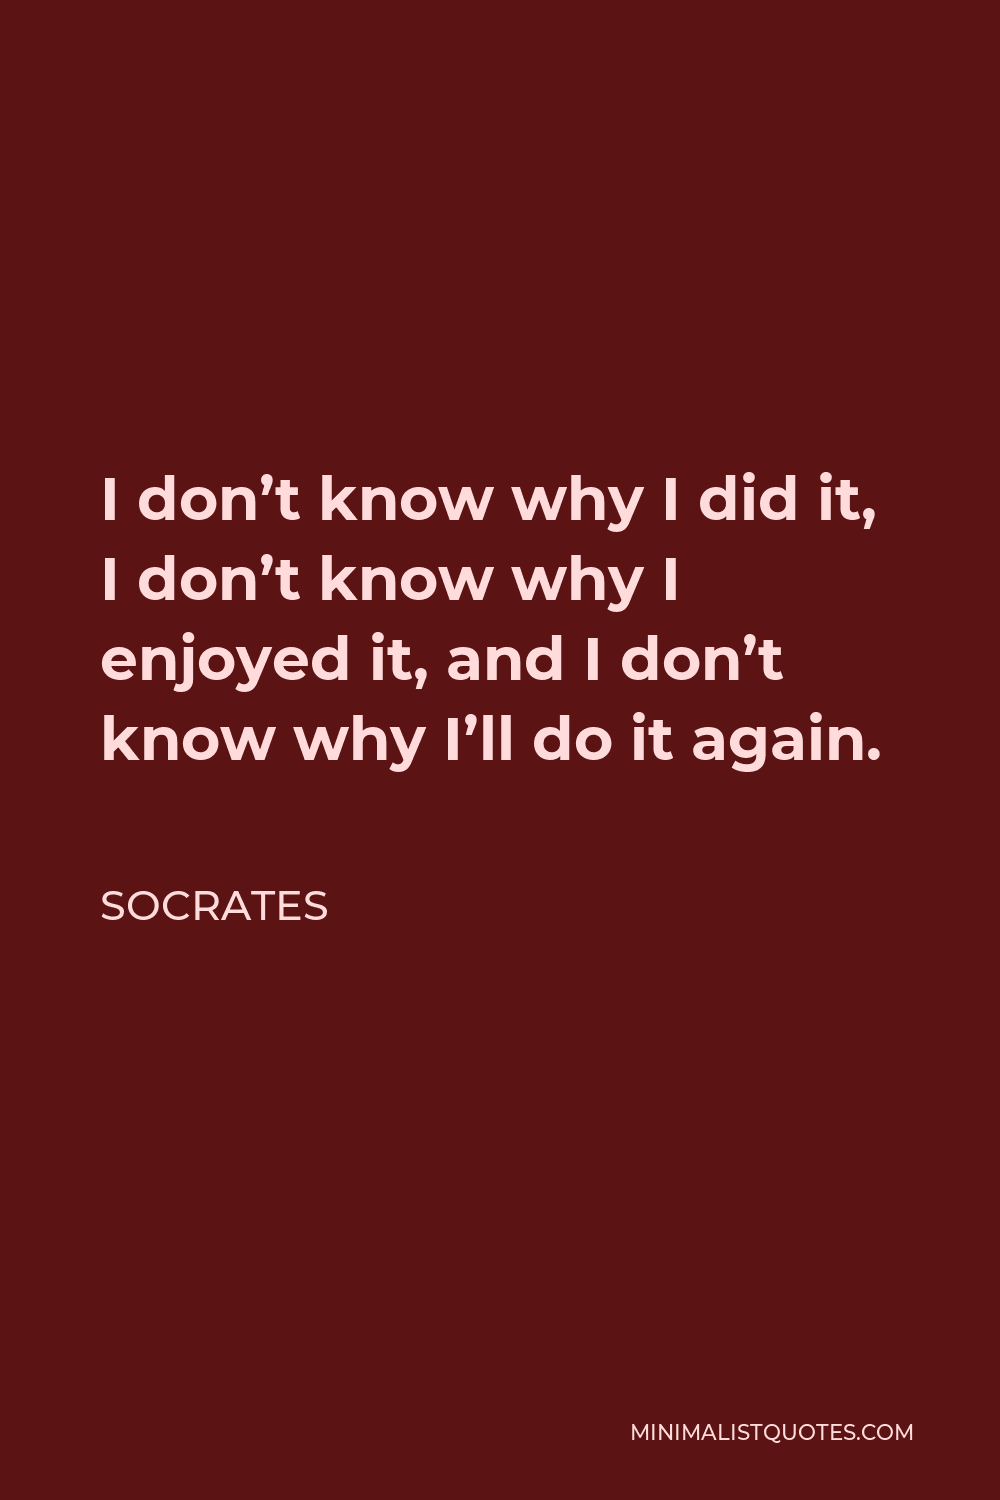 Socrates Quote: I don't know why I did it, I don't know why I enjoyed ...